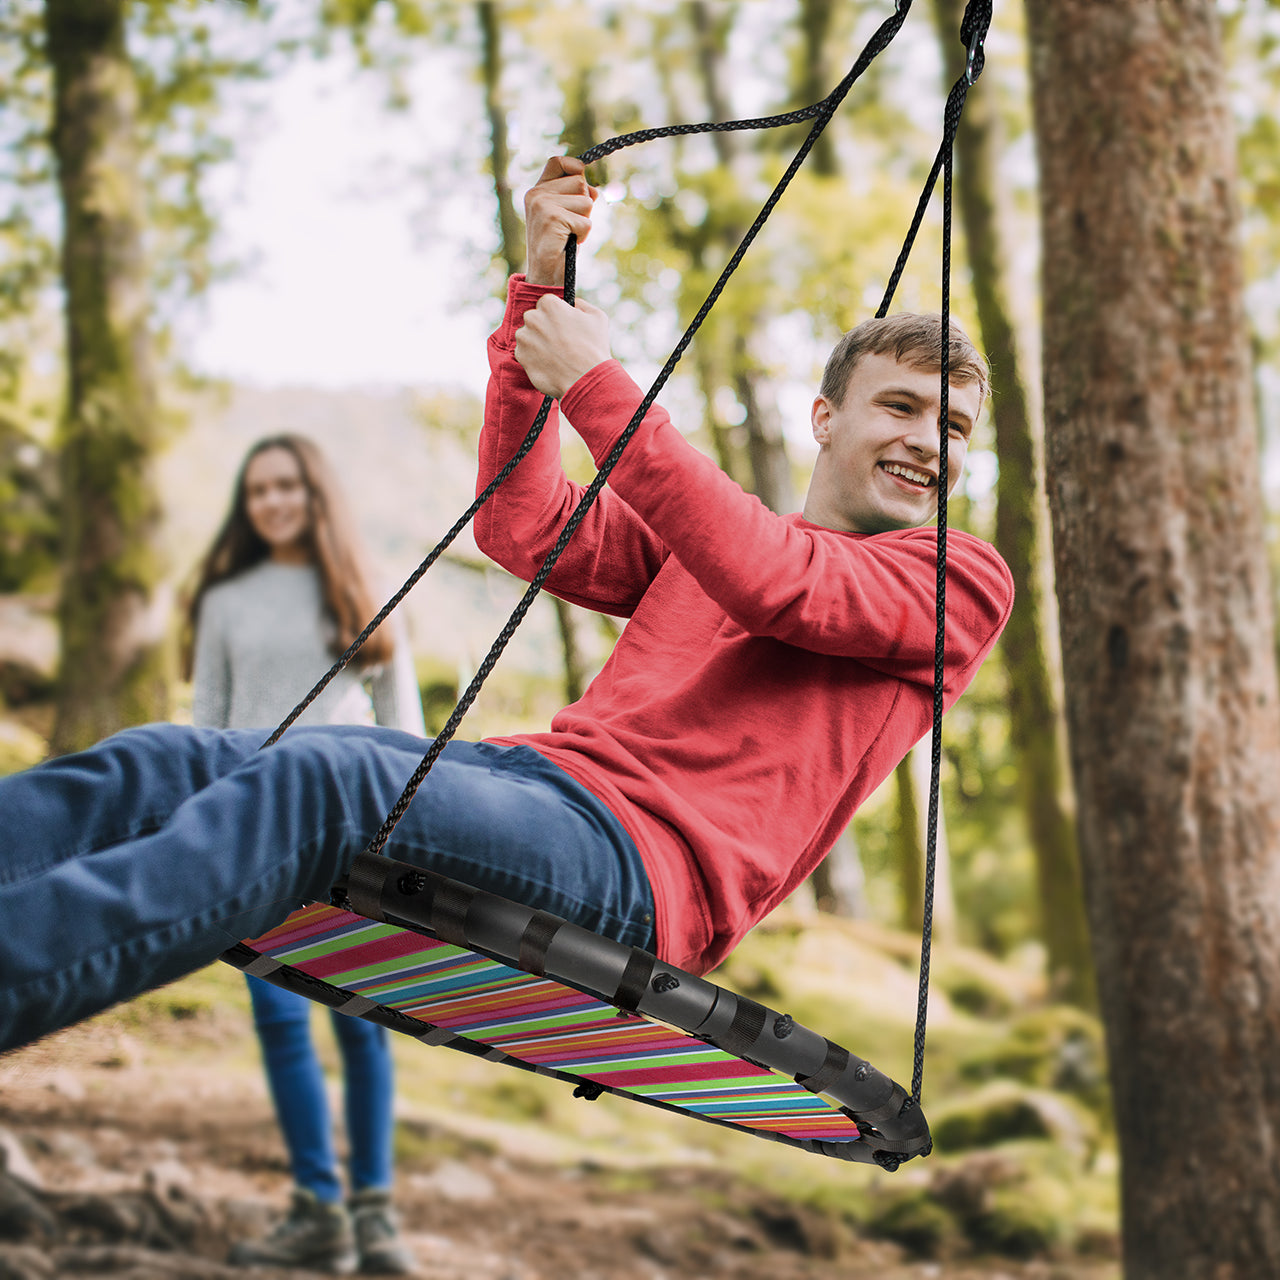 Boy swinging from a tree on the Bliss Outdoors Striped Fabric Tree Glider. A girl in the background is watching him have fun.